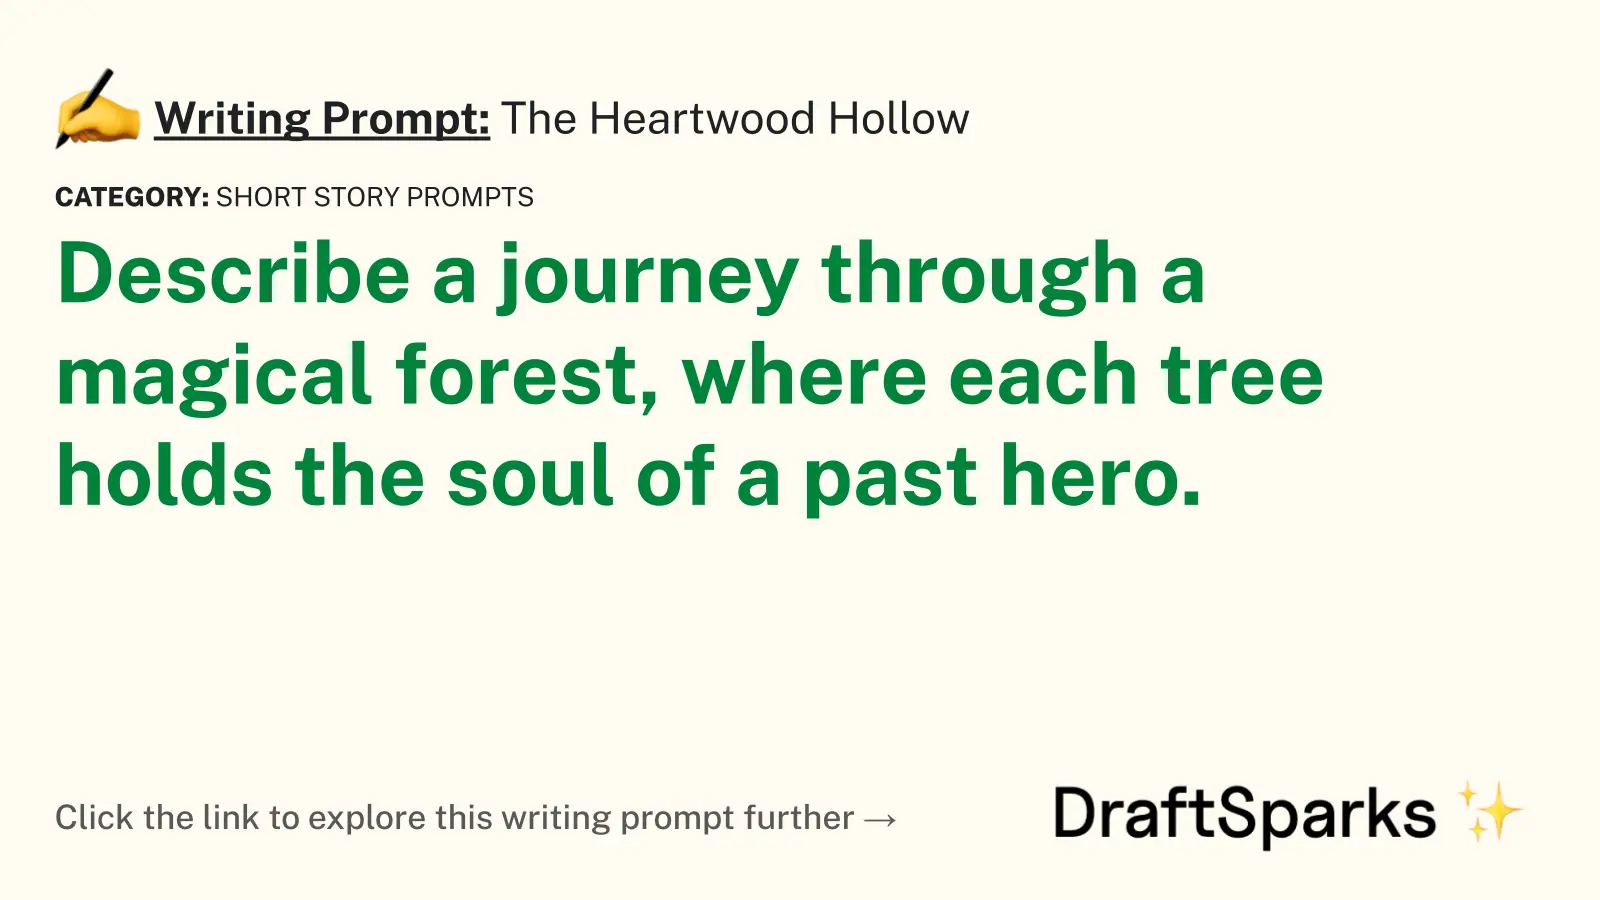 The Heartwood Hollow